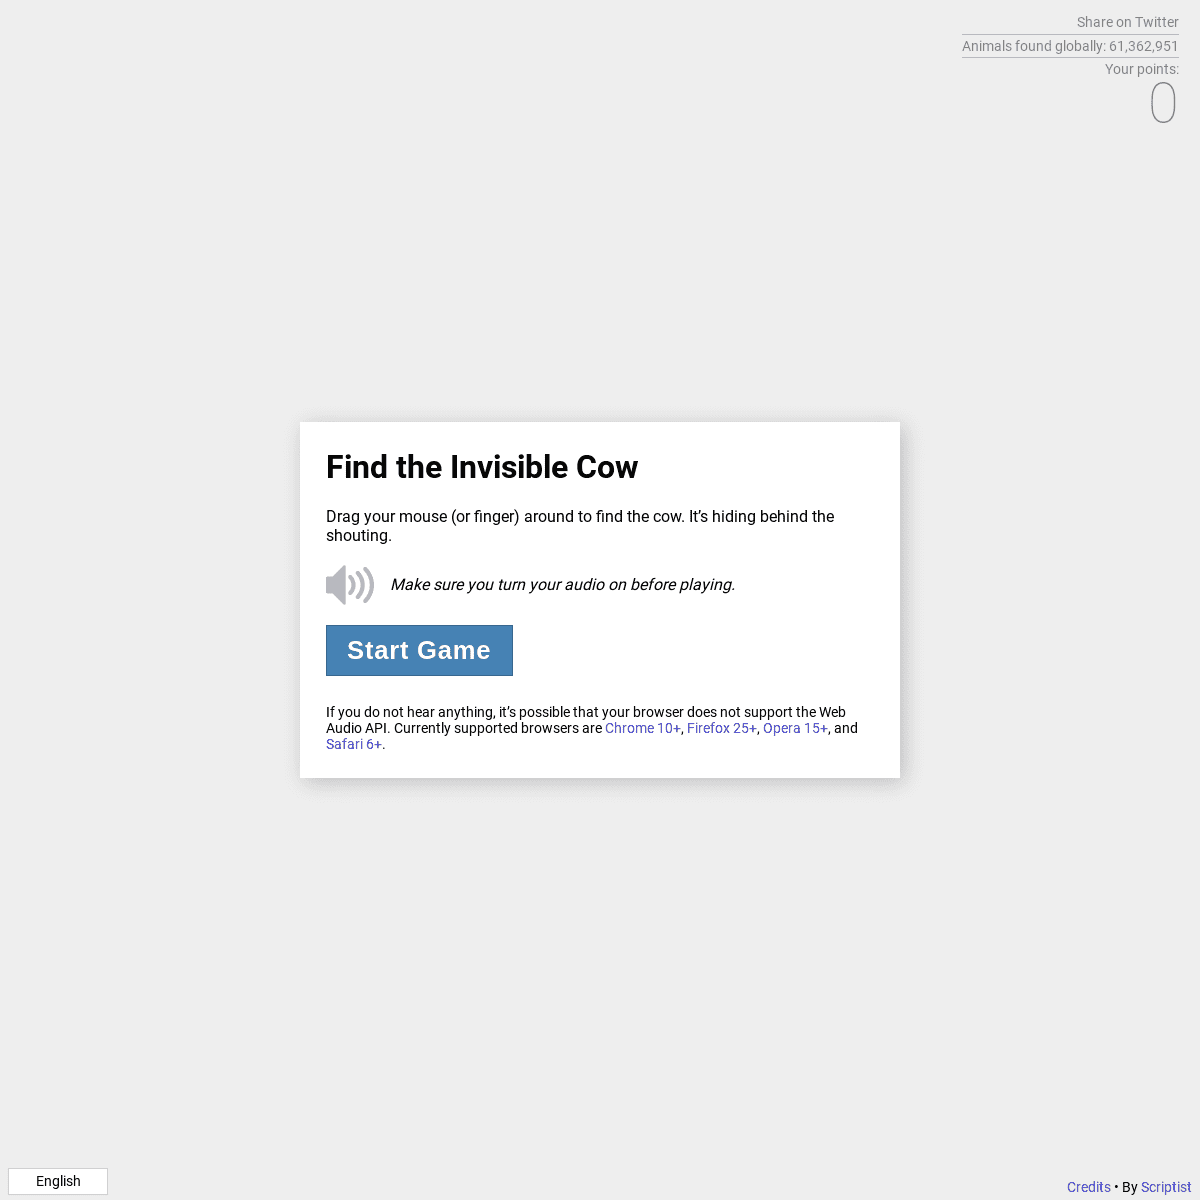 A complete backup of https://findtheinvisiblecow.com